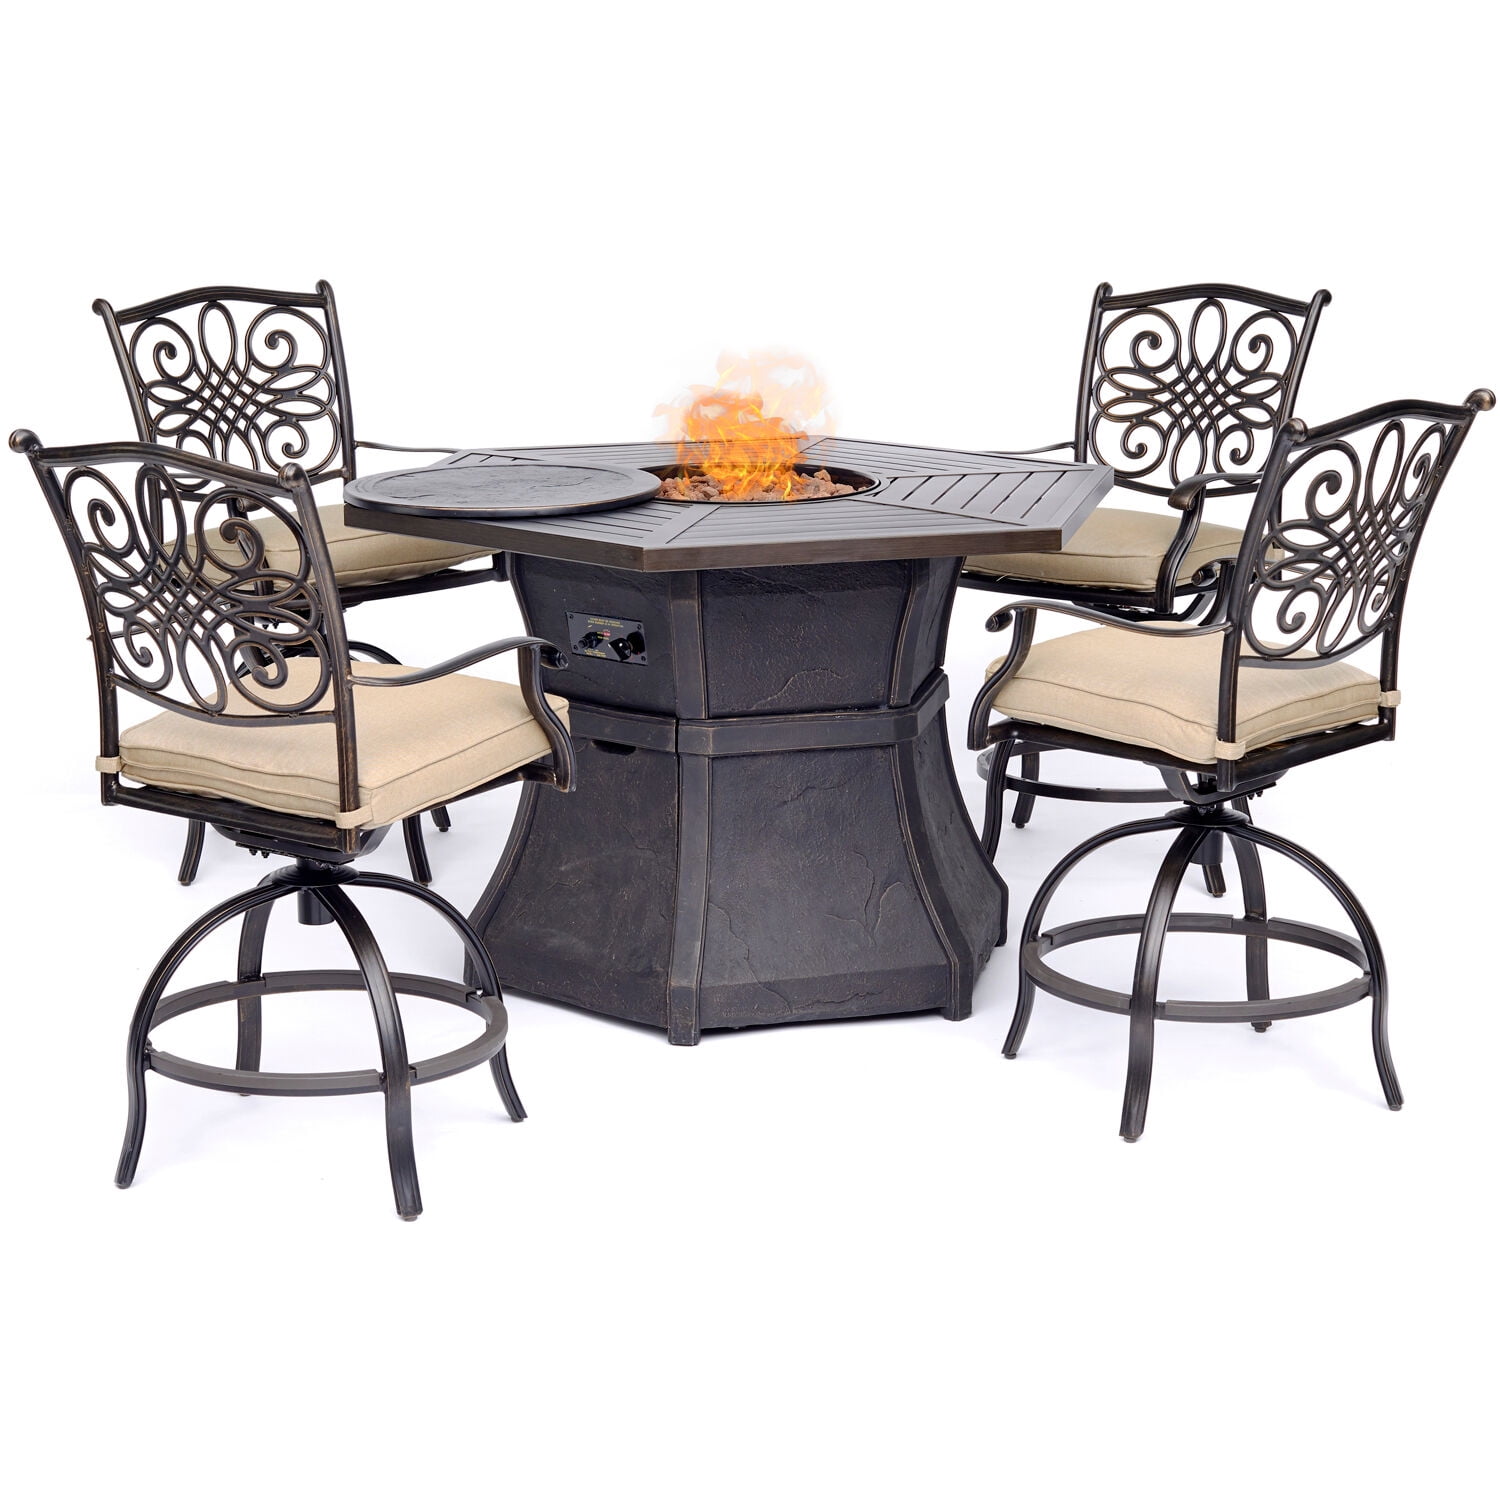 Tan Hanover TRAD5PCFPRD-BR Traditions 5-Piece High-Dining Set Outdoor Furniture 